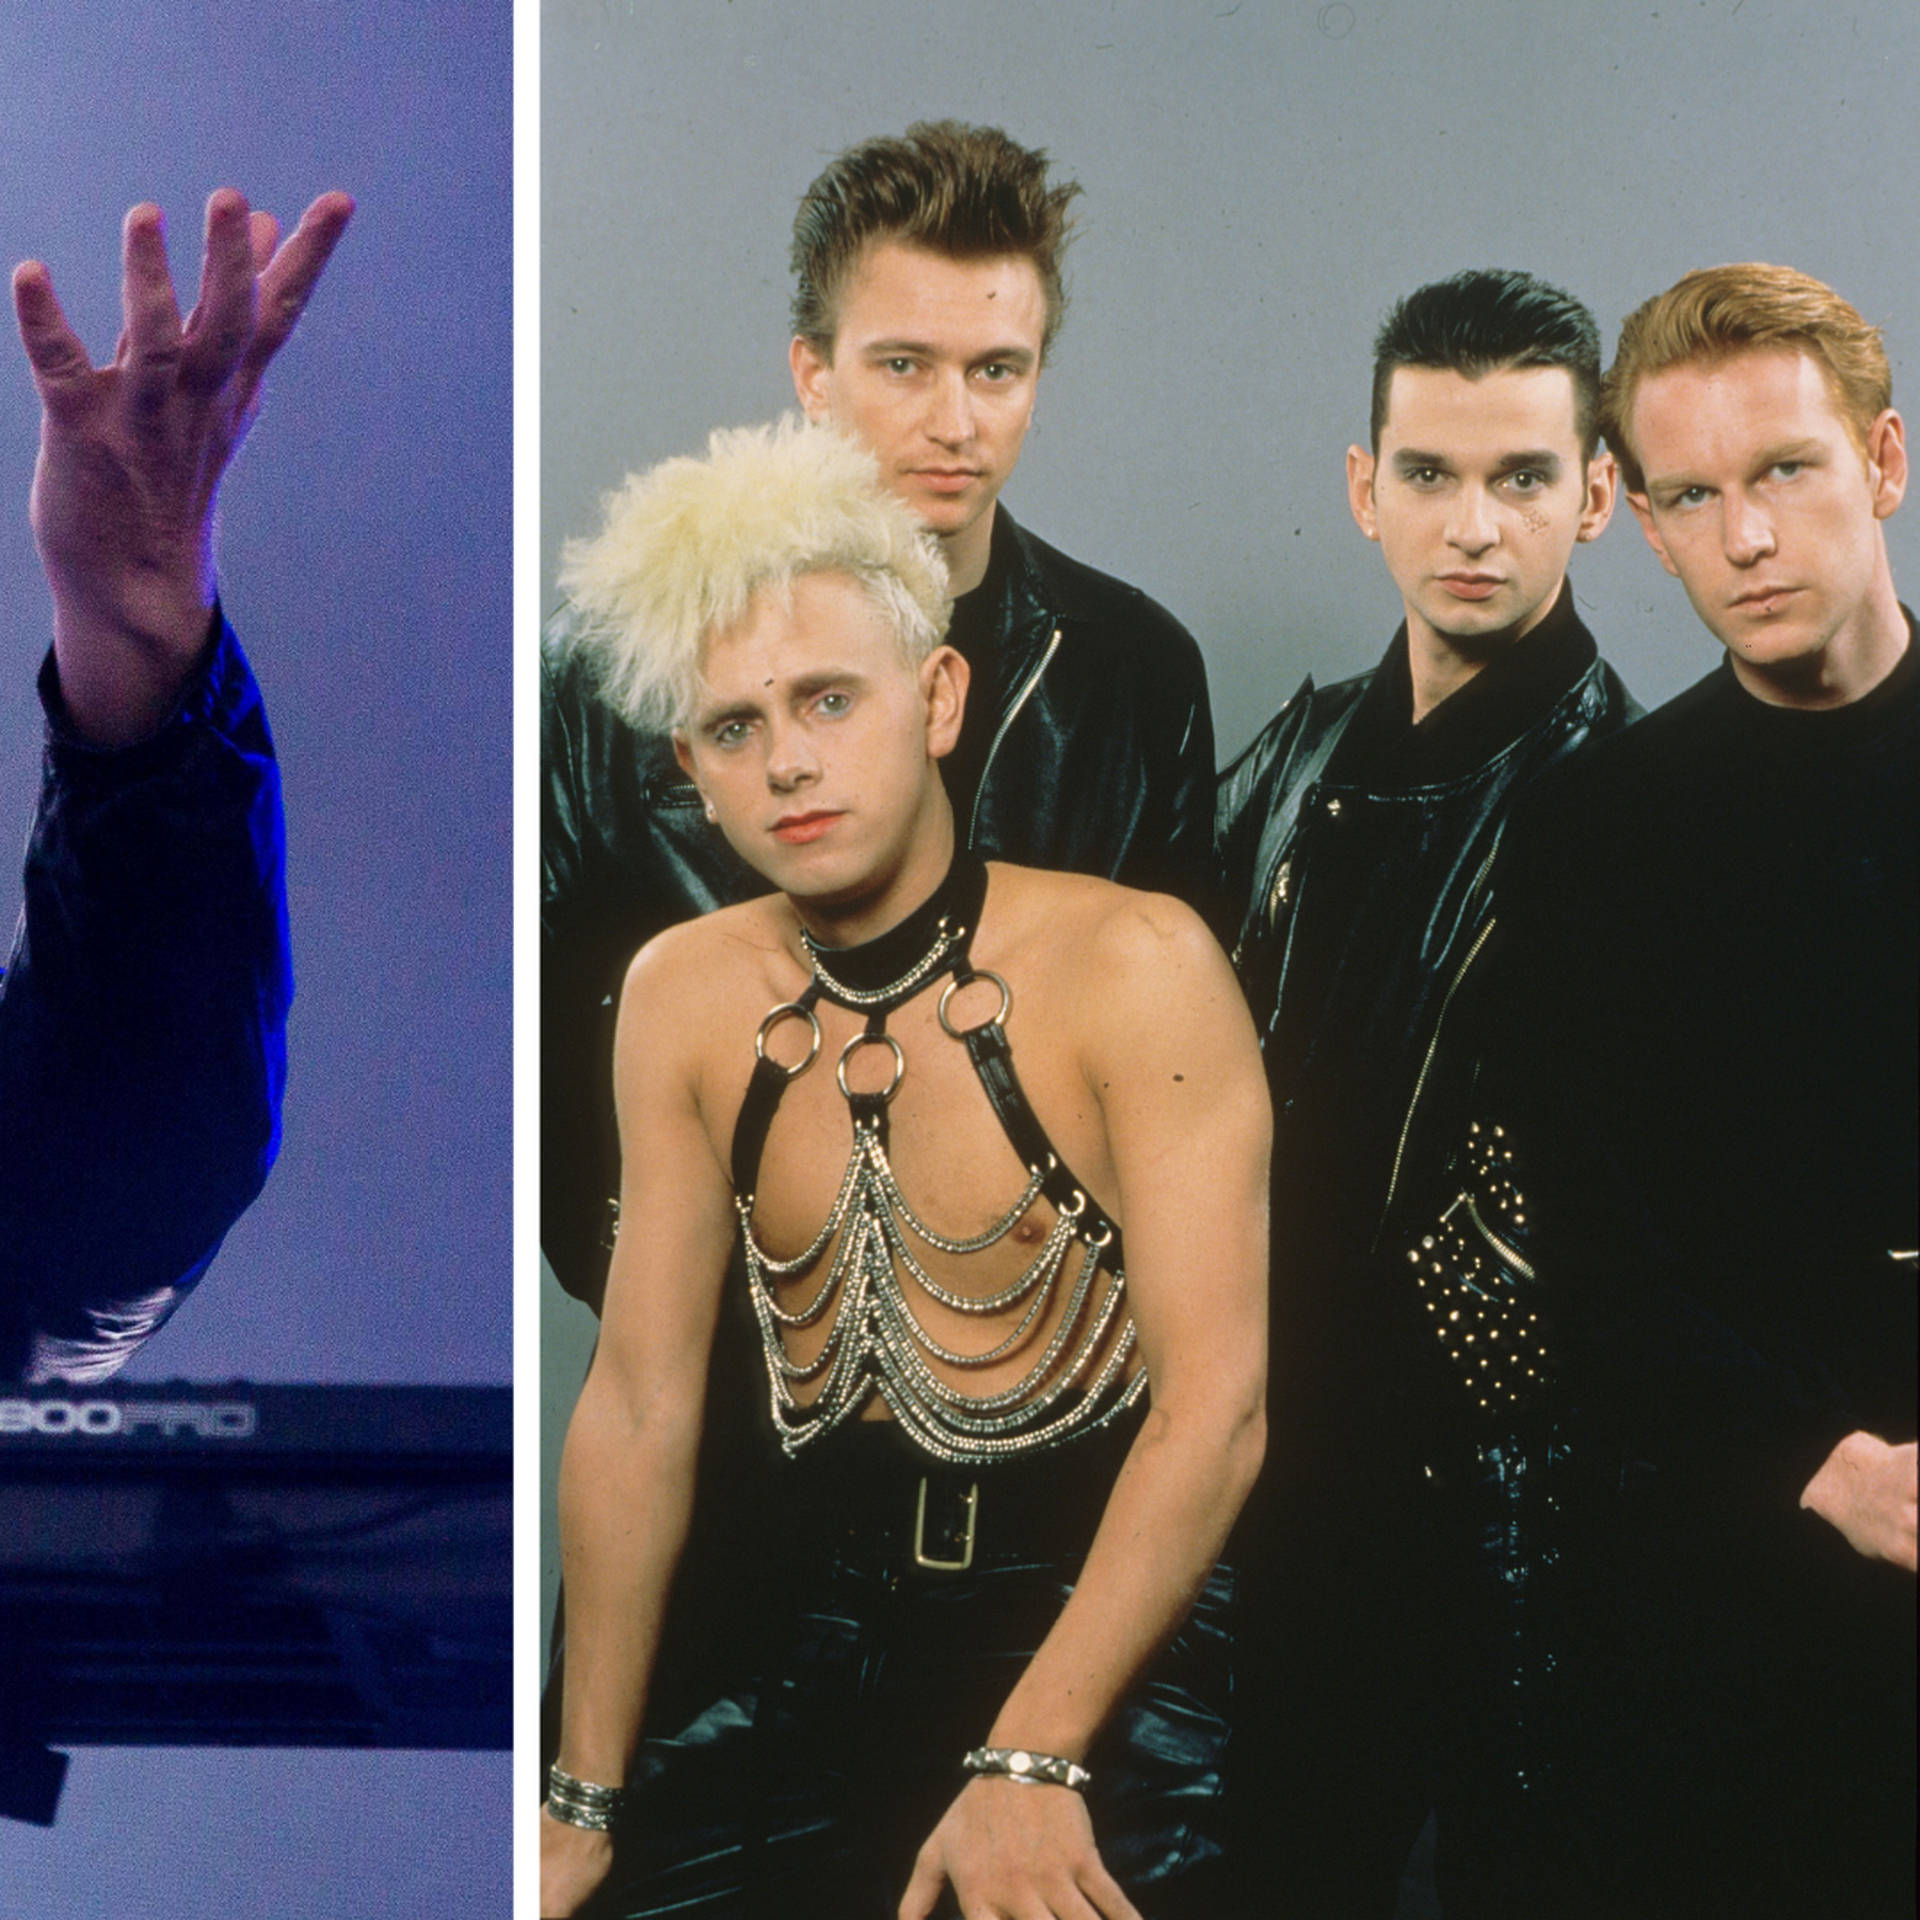 Depeche Mode keyboardist and founder Andy Fletcher dies aged 60 - LBC